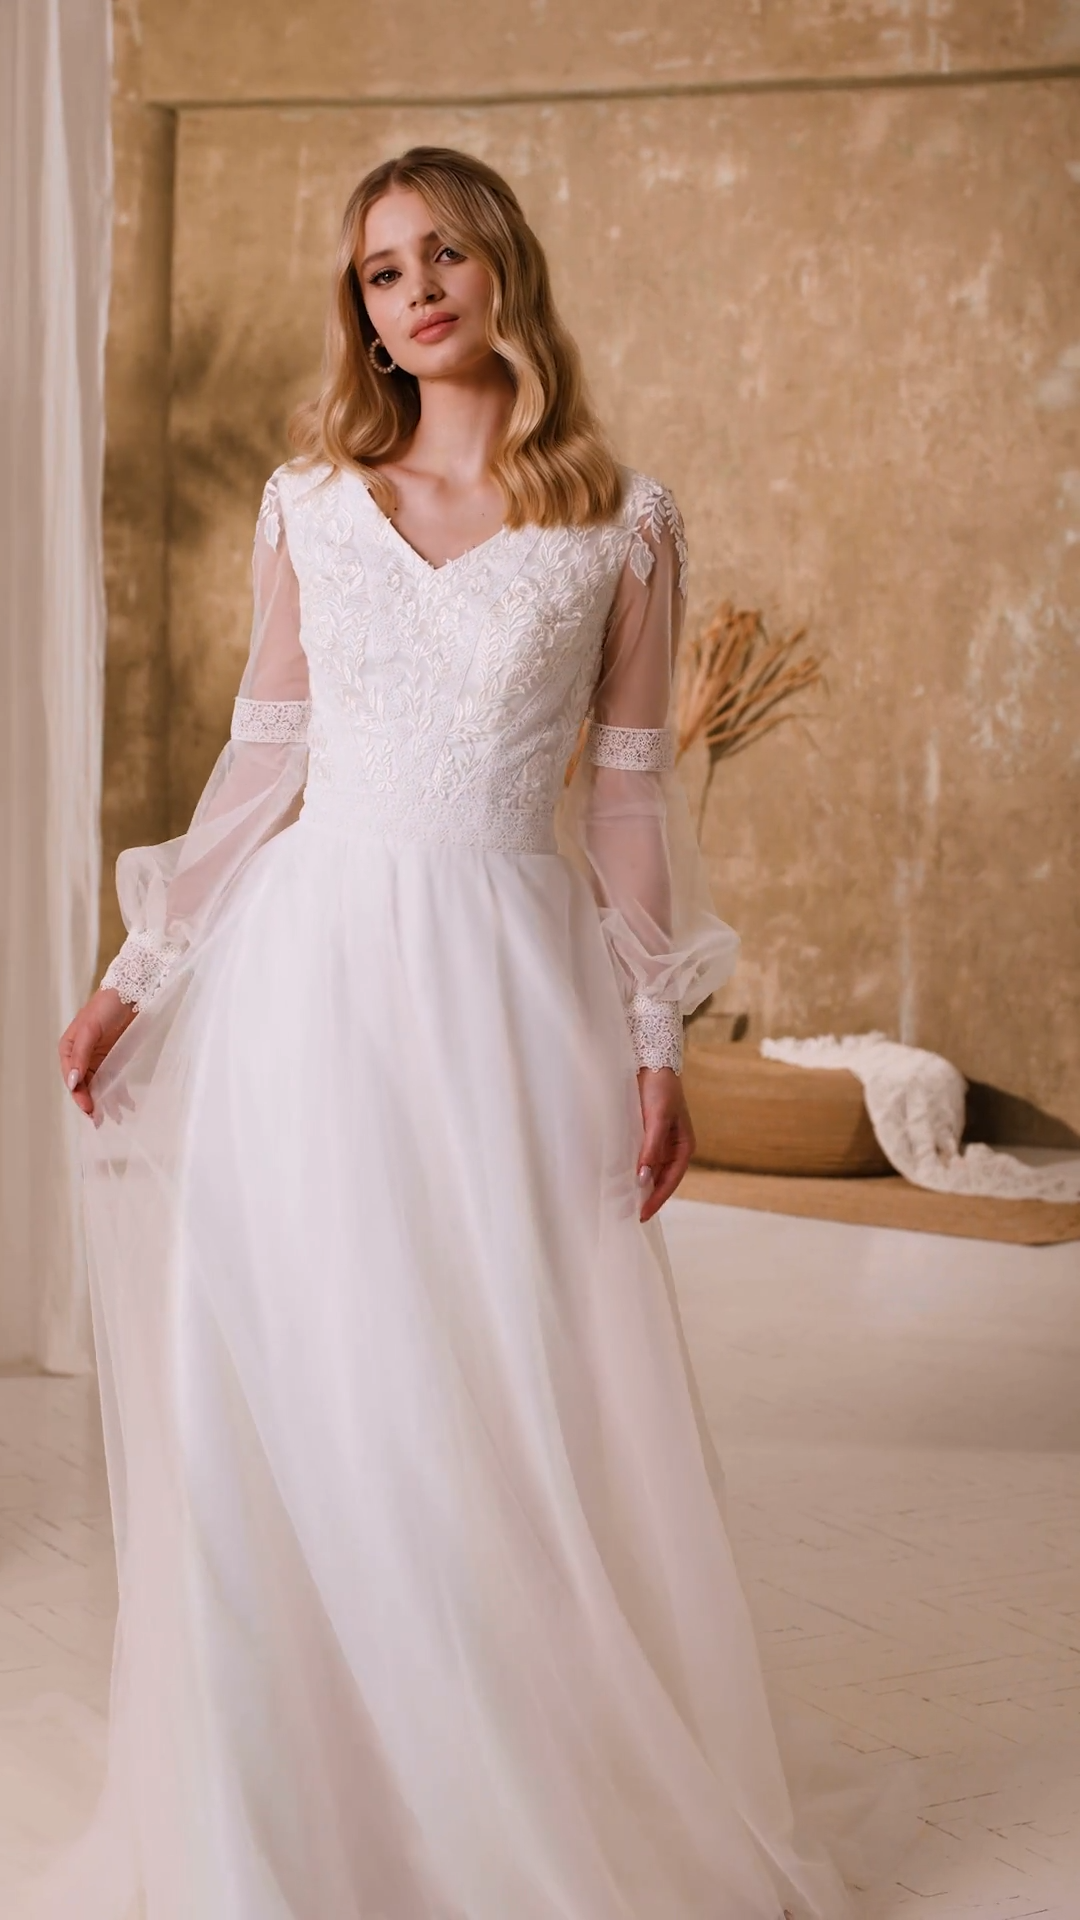  A-line Modest Wedding Dress With Lace Bodice and Long Lace Cuffed Poet Sleeves Style M5057